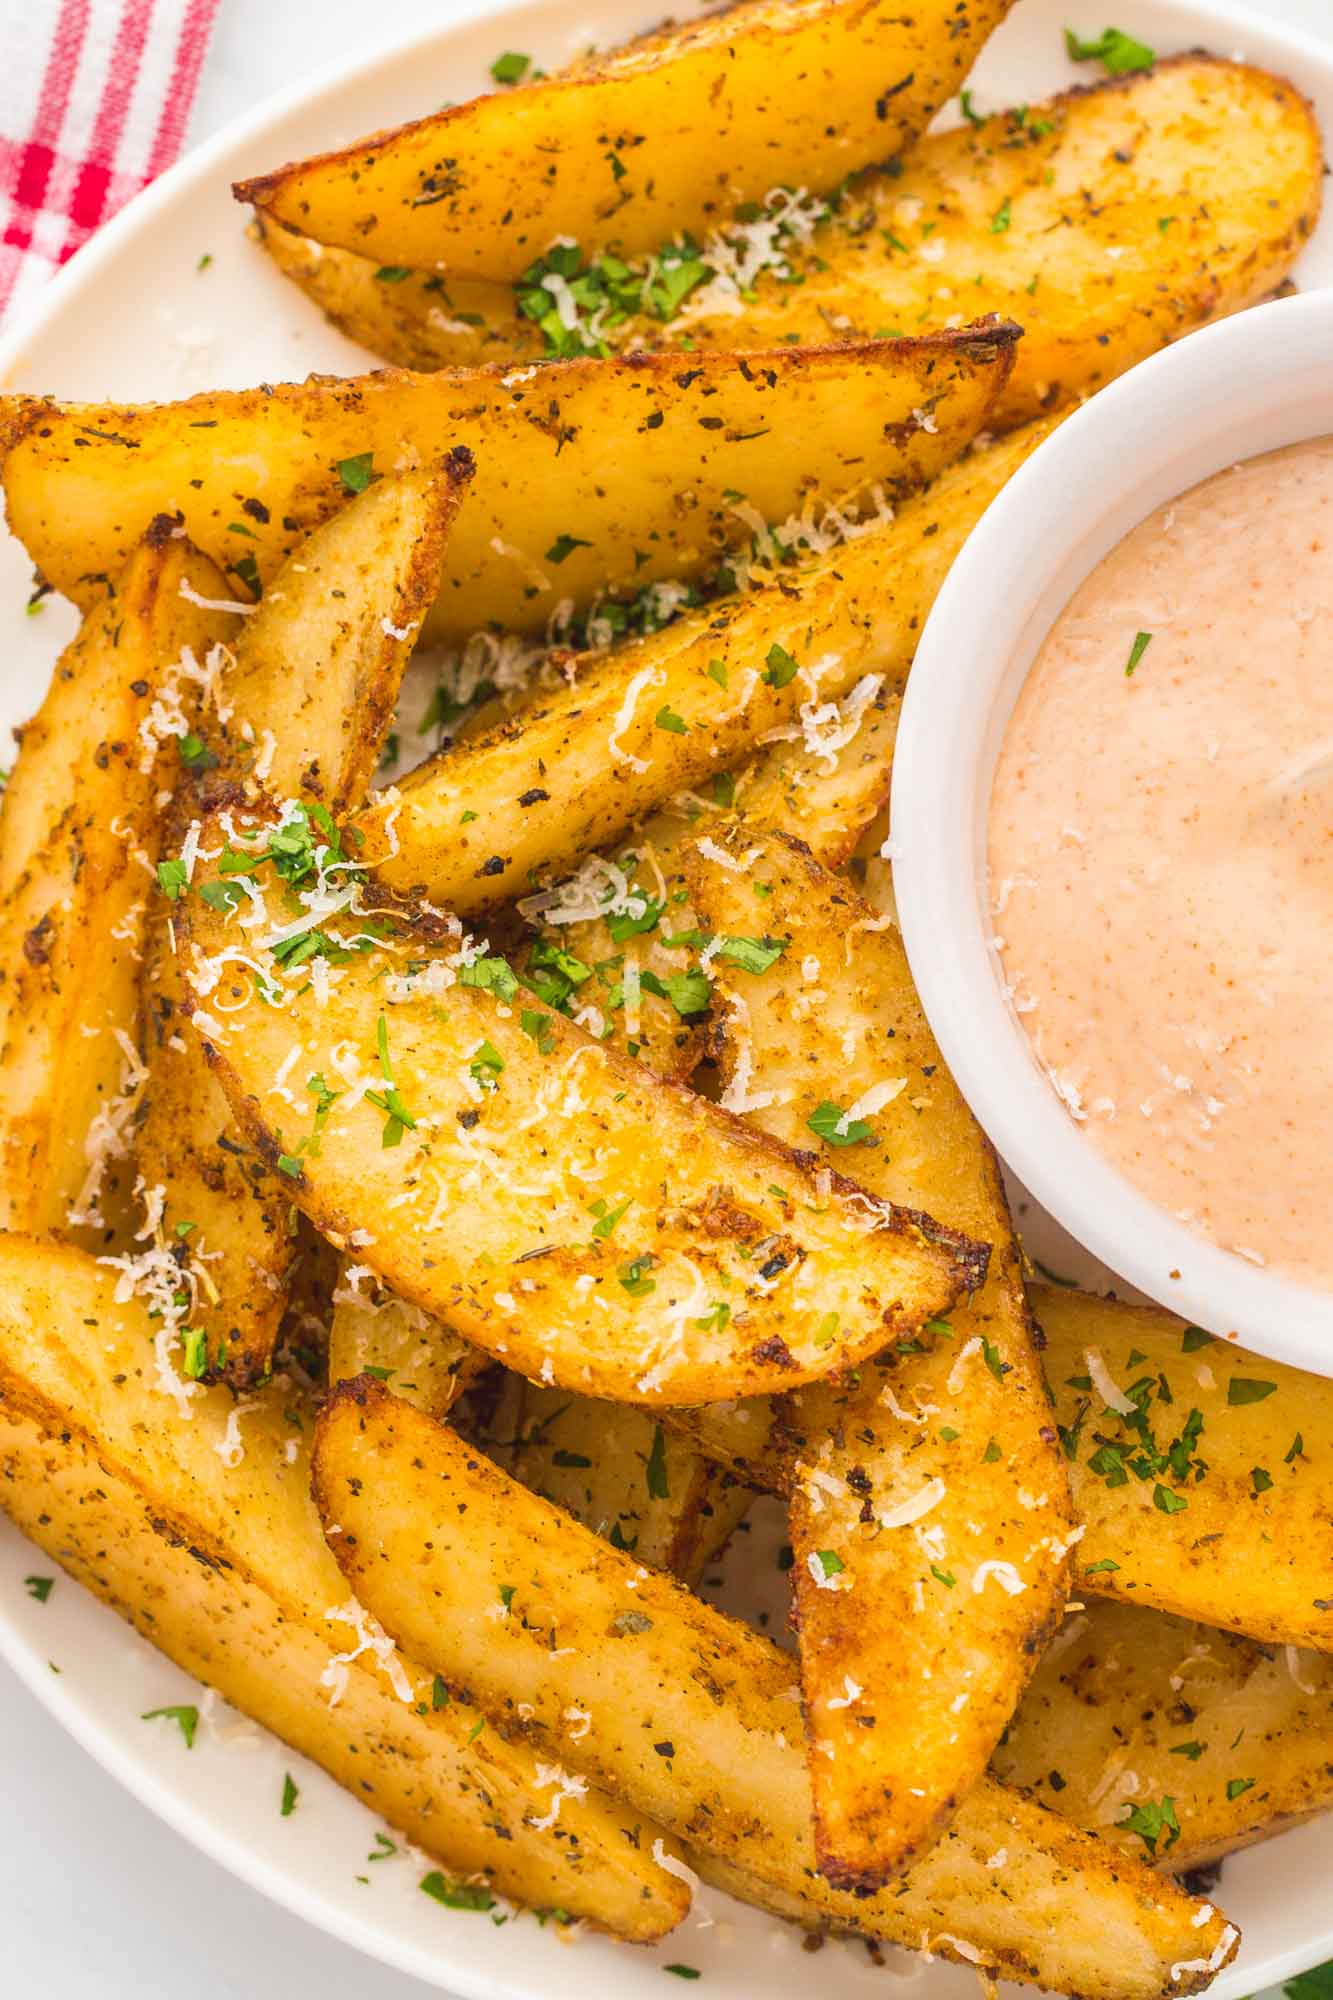 cropped image showing half of a plate of baked russet wedges and a cup of fry sauce in the center.